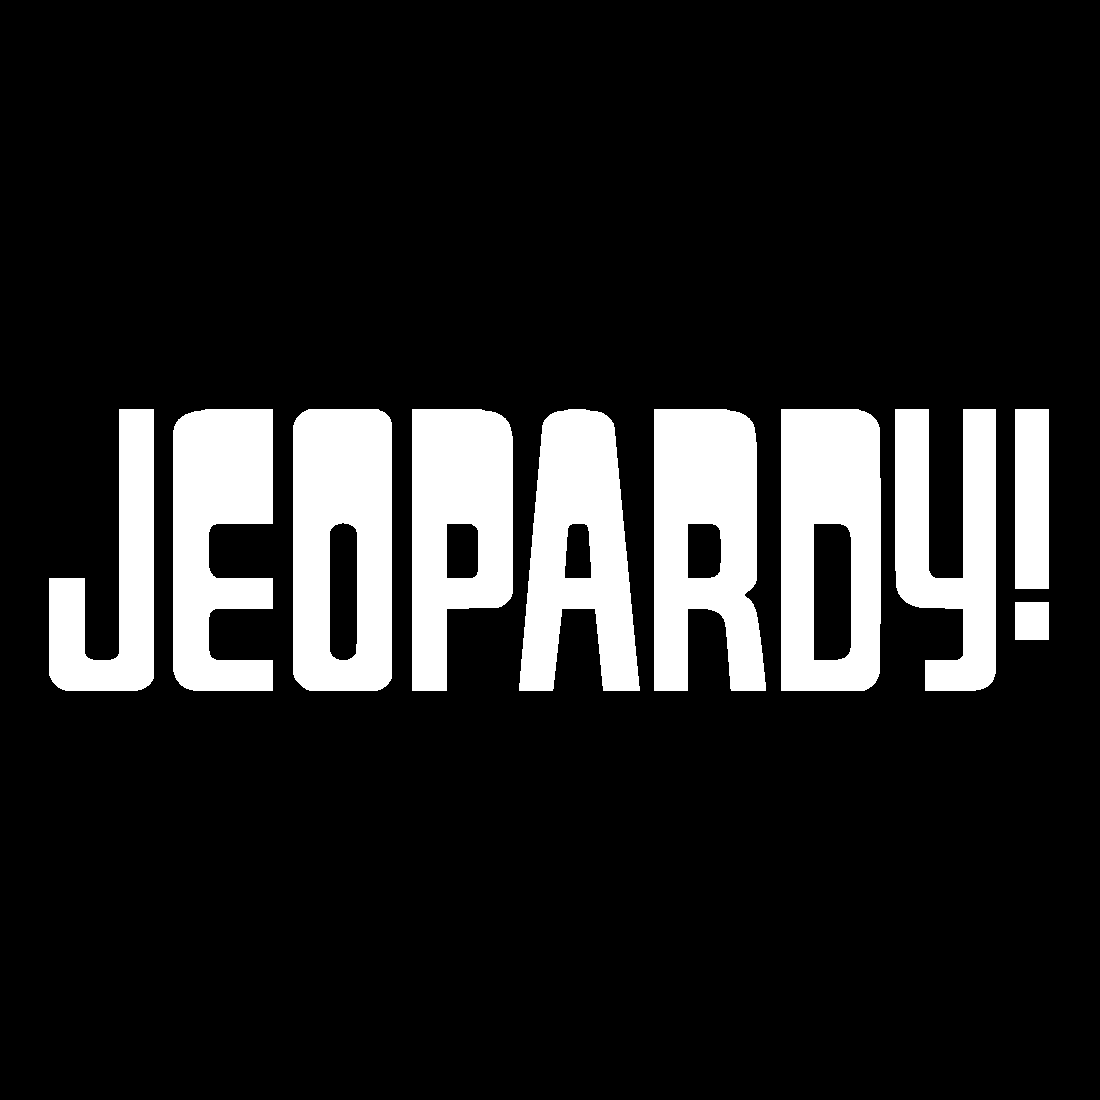 Black and White Letter Logo - Jeopardy!/Airdates